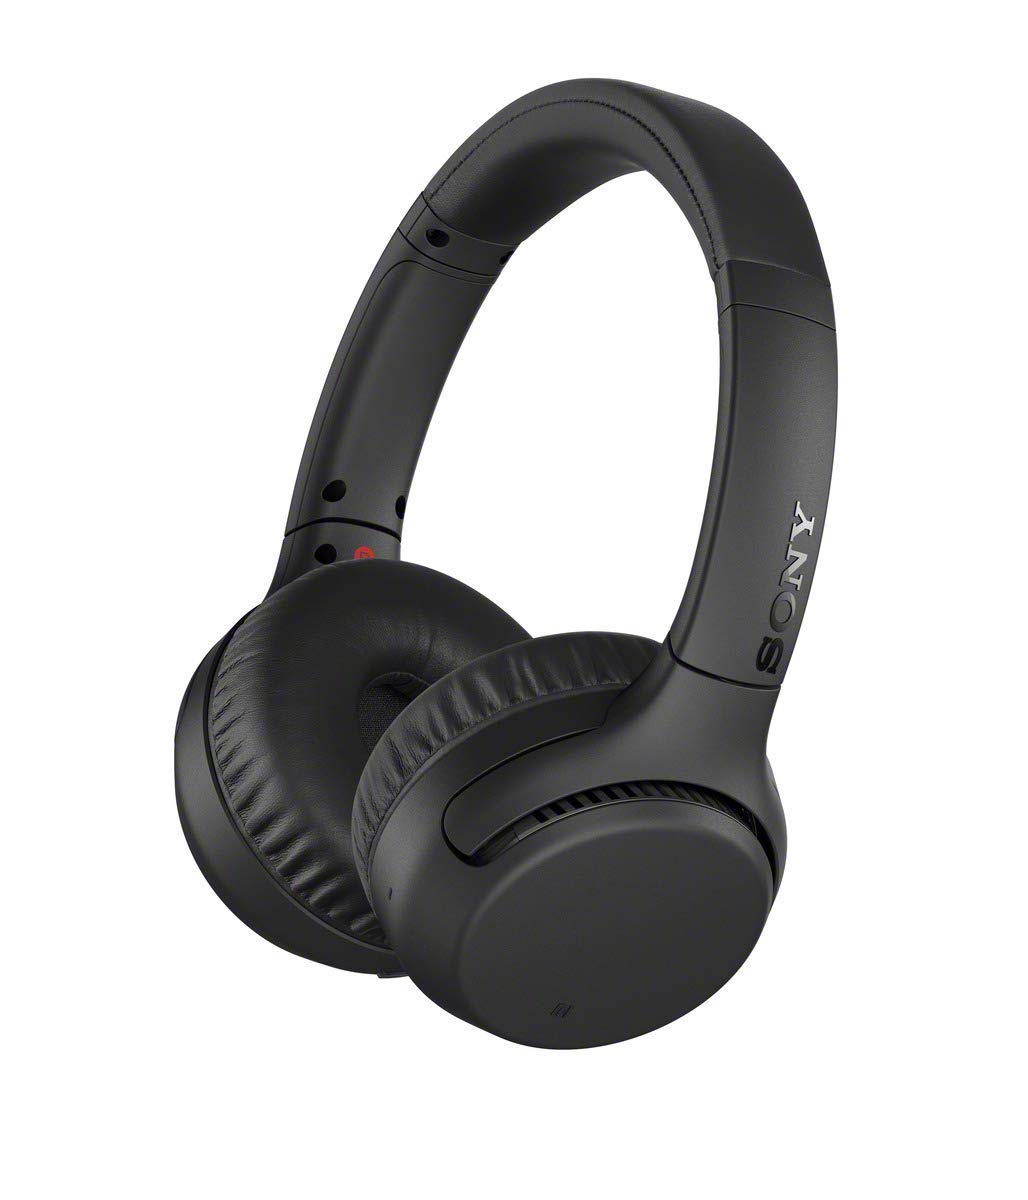 Sony WH-XB700B Wireless Headphones, 30 Hours Battery Life, on-Ear Style, optimised for Voice Assistant - Black-International Version